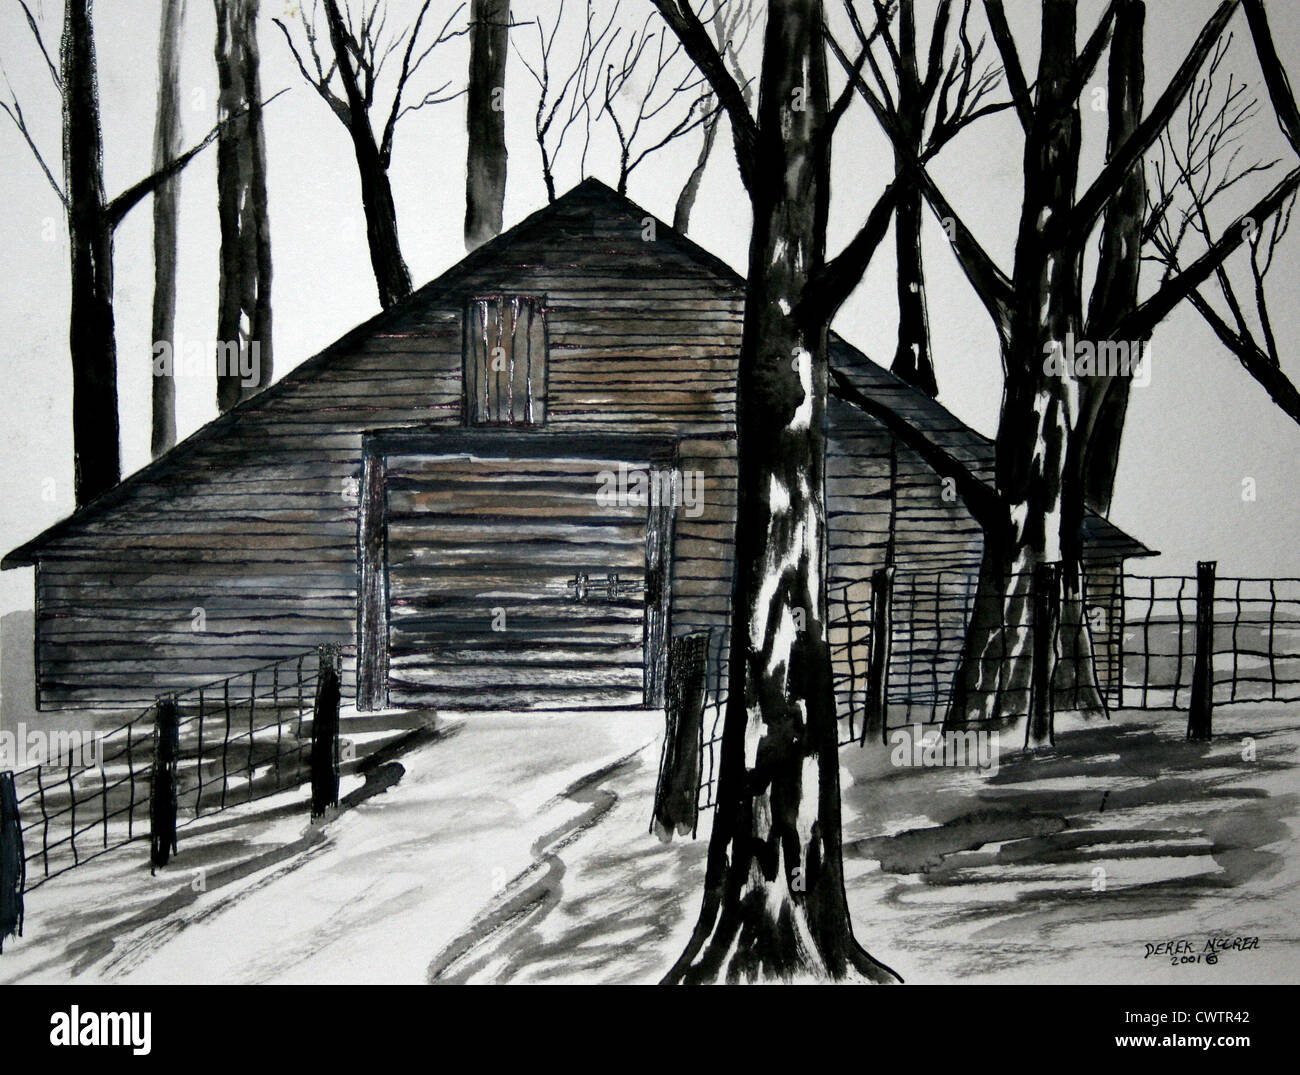 Country barn black and white art pen and ink drawing watercolor painting Stock Photo